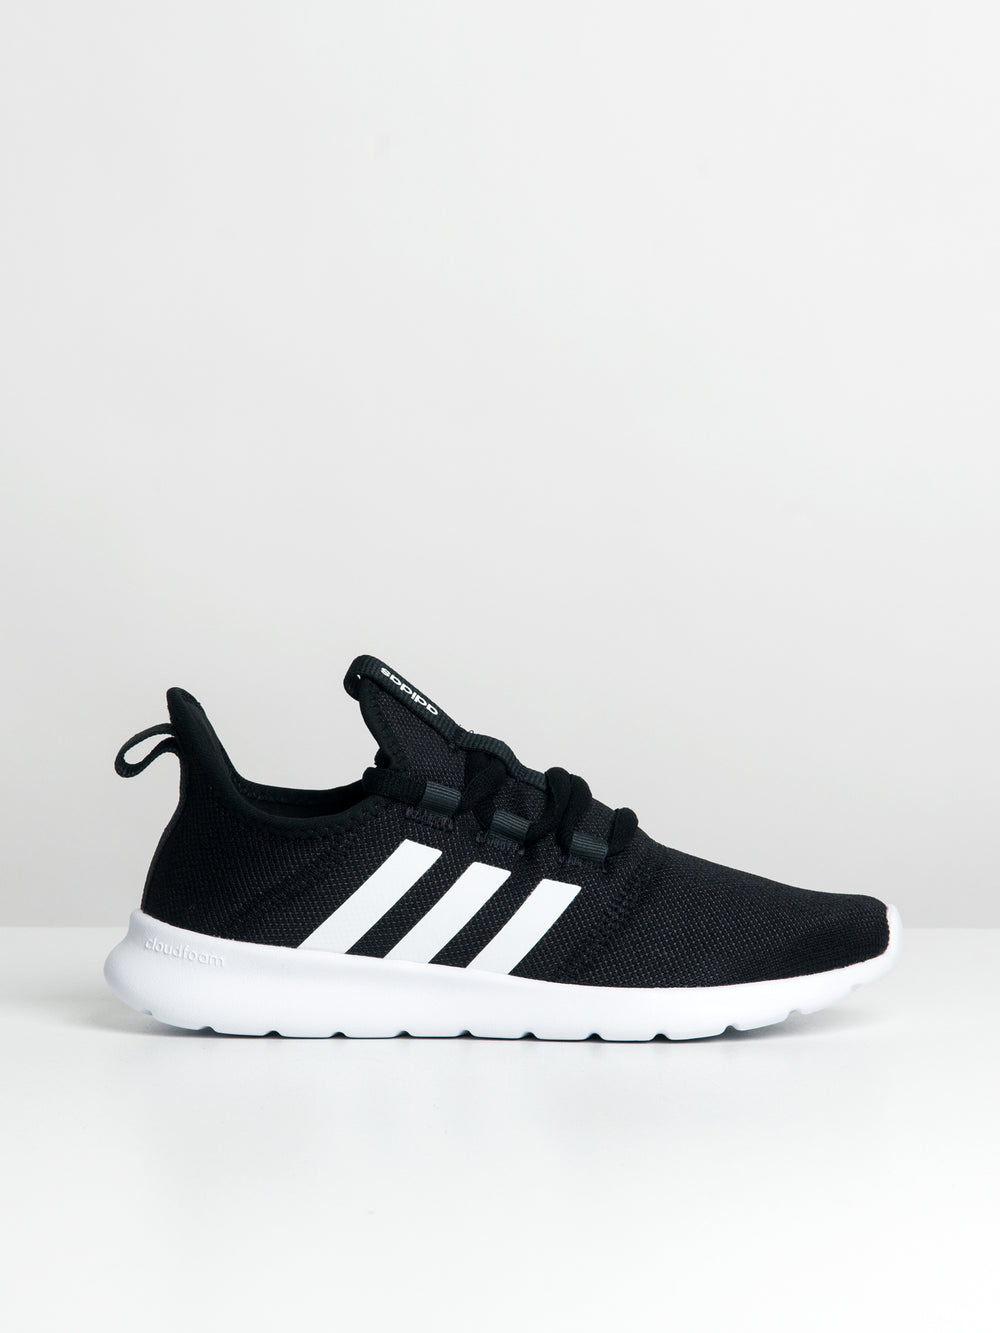 Best Adidas Shoes For Women 2023 • The Sport Review